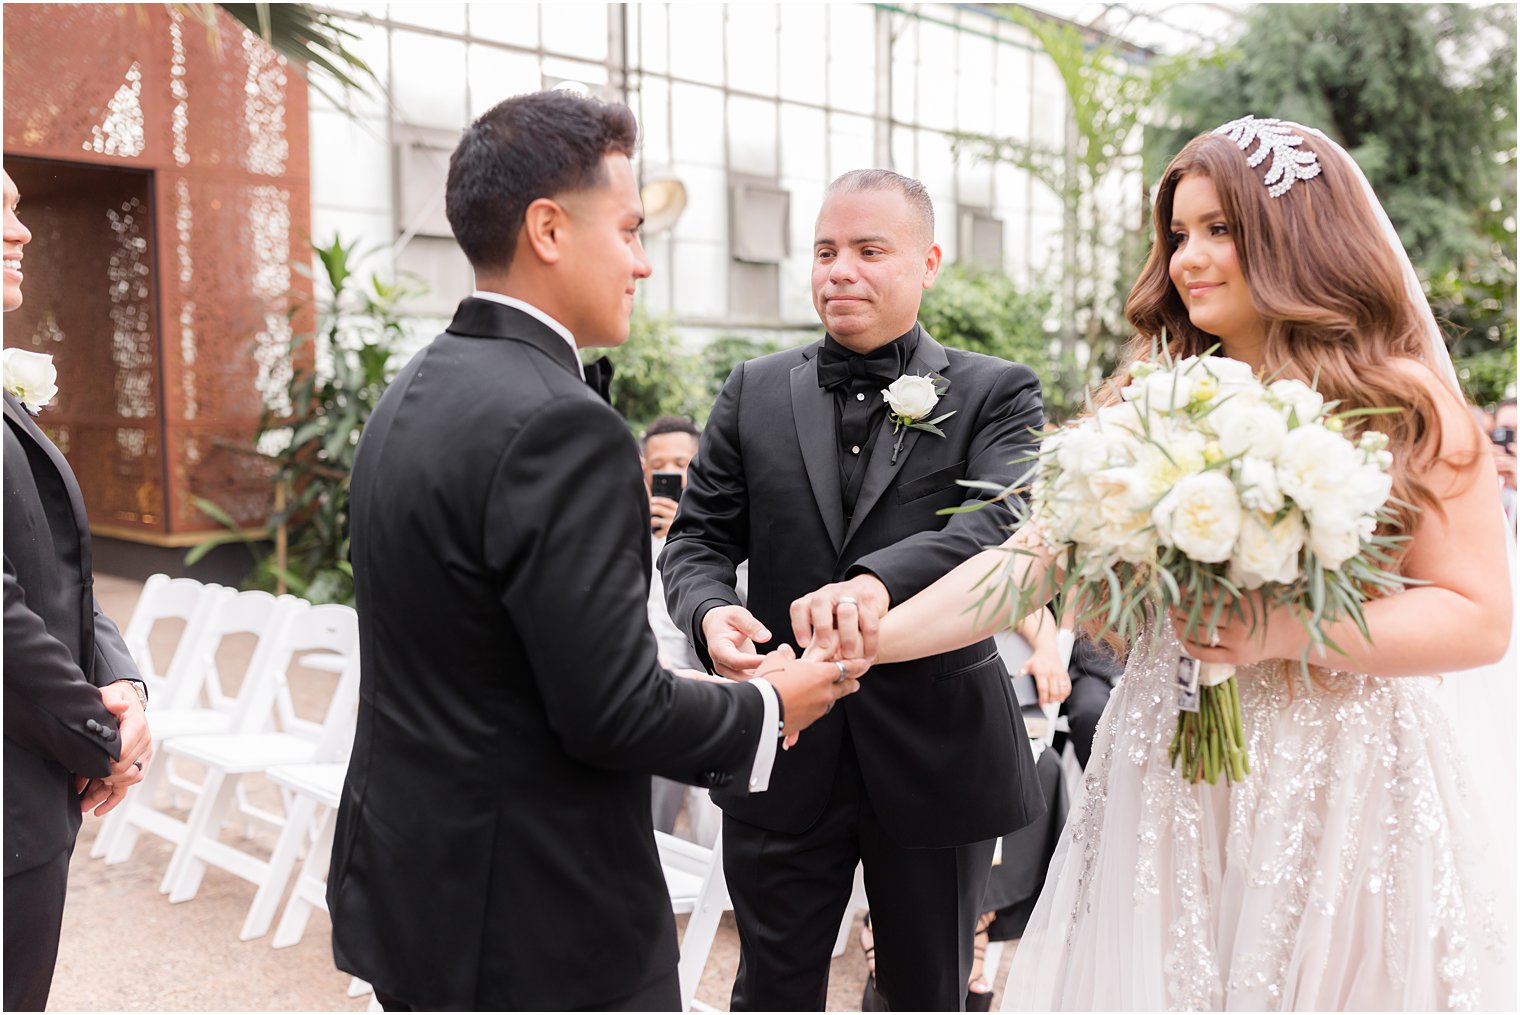 father gives bride's hand to groom during Fairmont Park Horticulture Center wedding ceremony